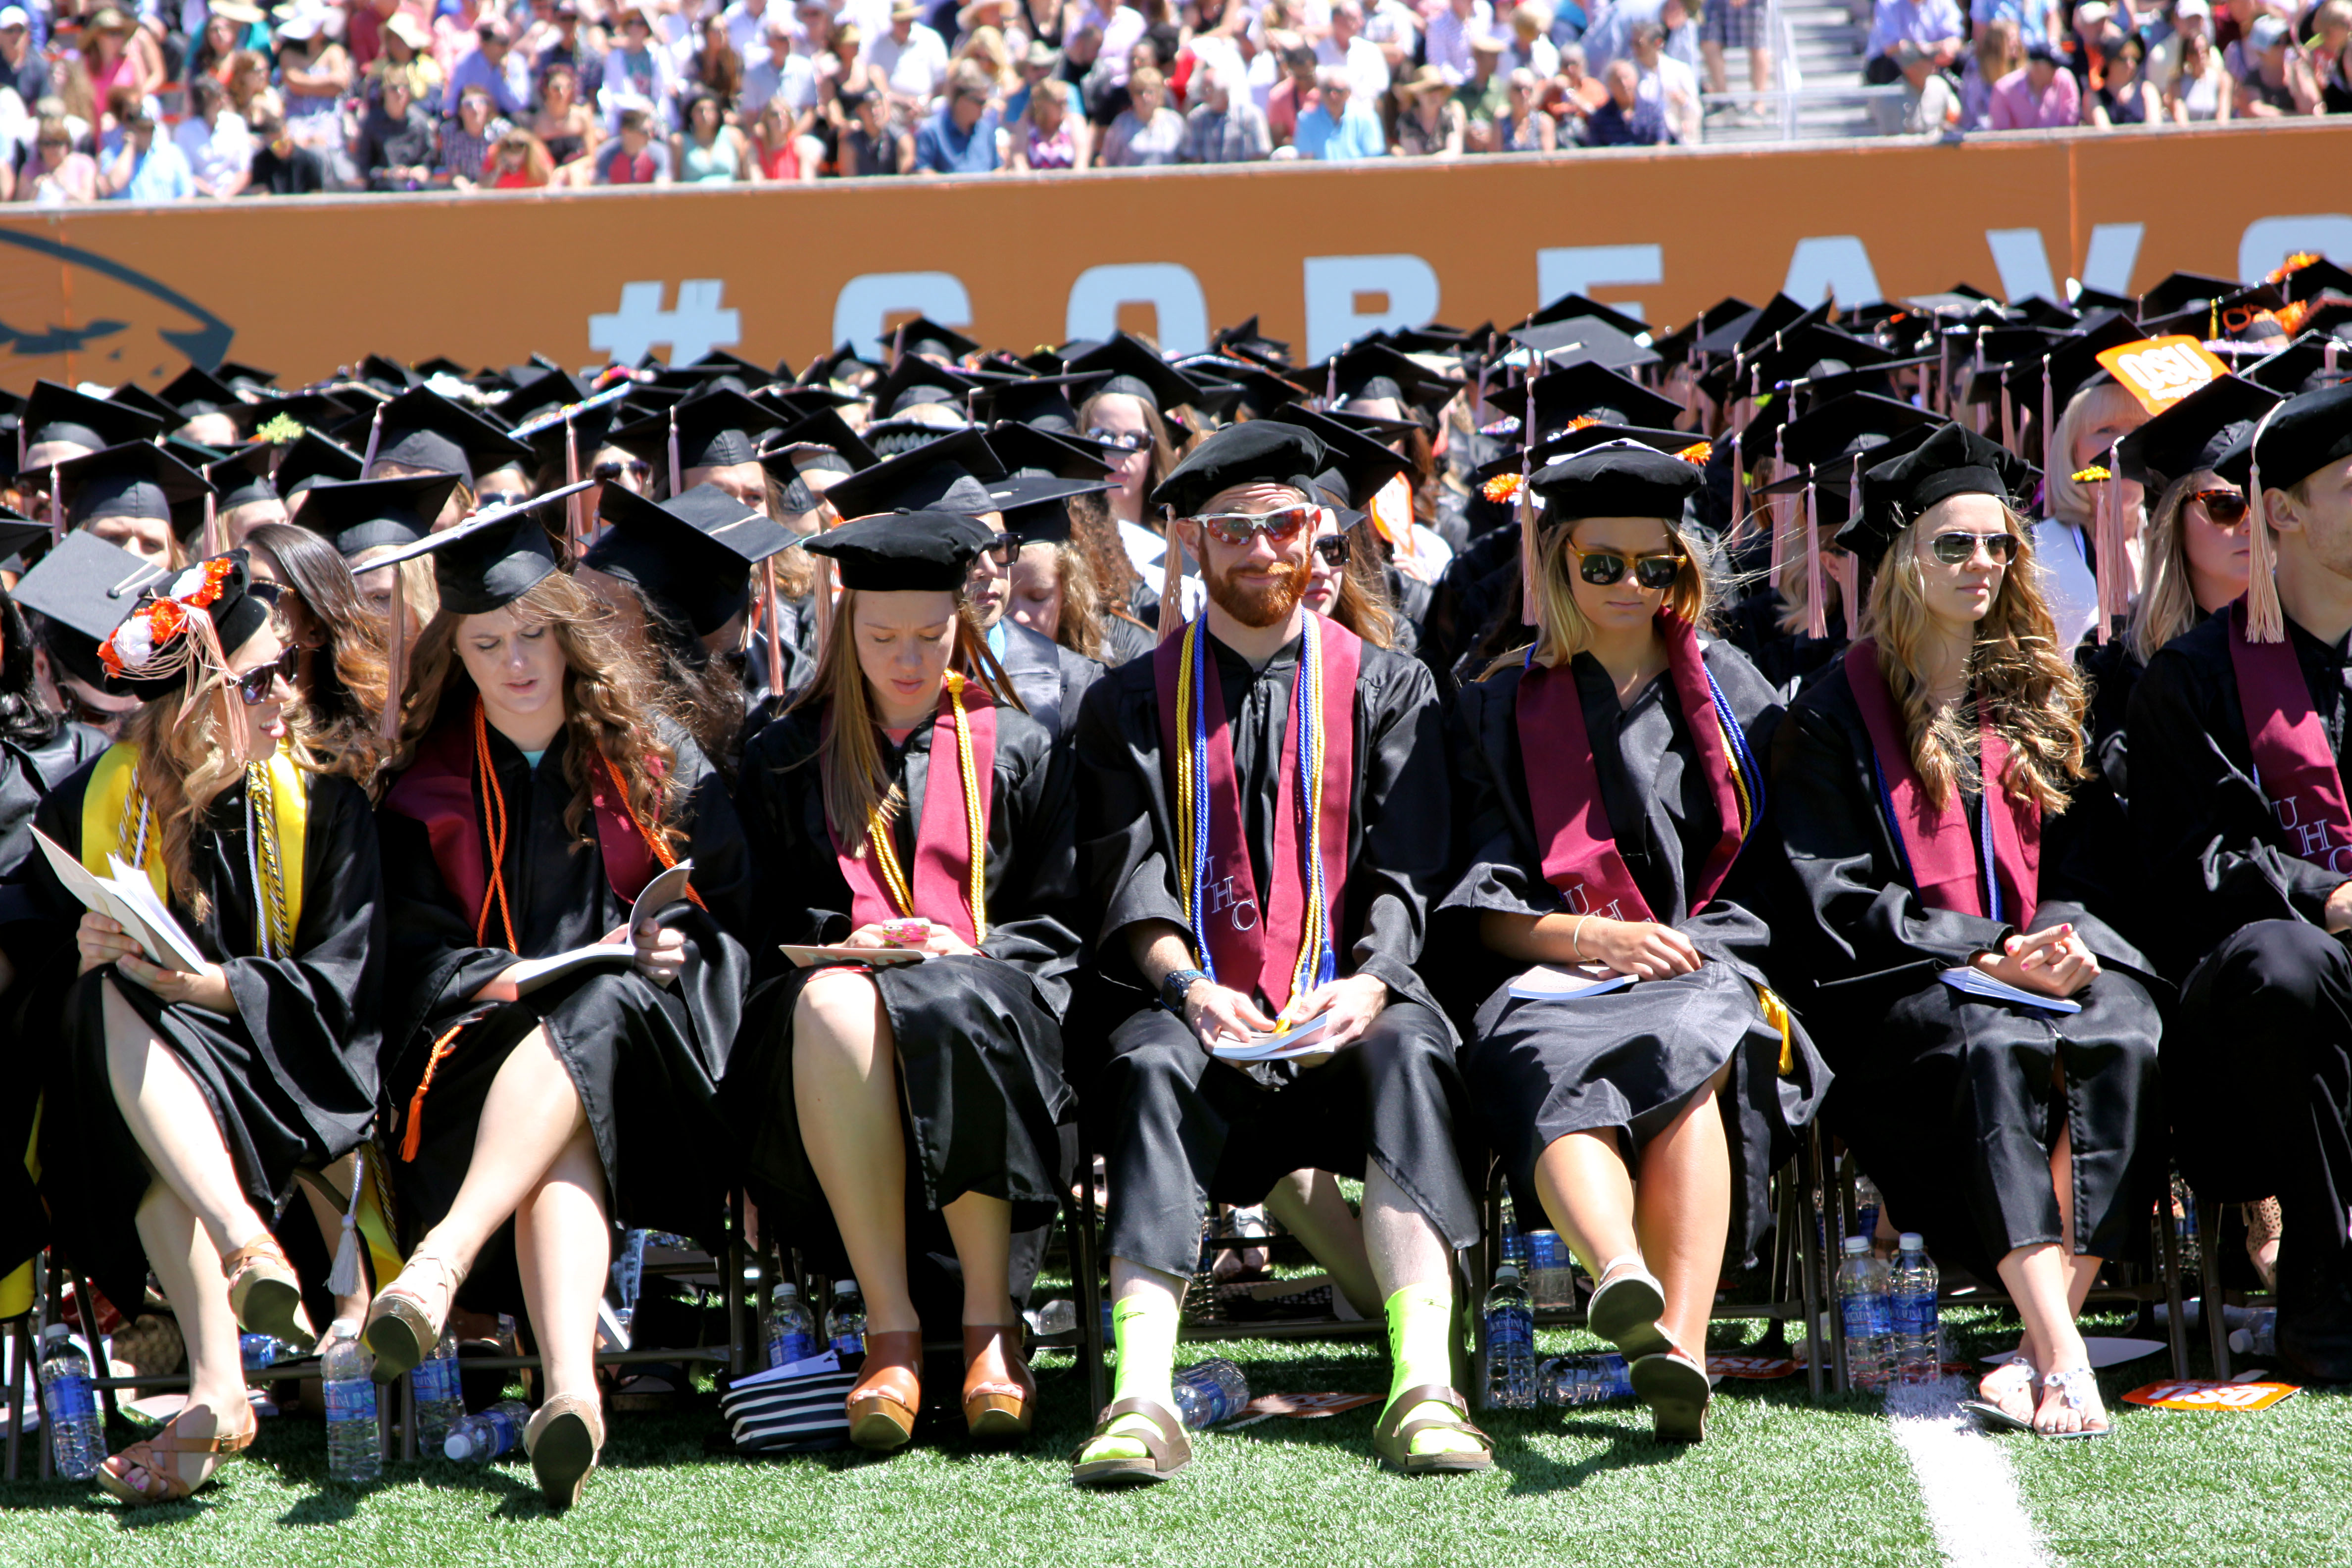 OSU celebrates 149th commencement with record number of graduates